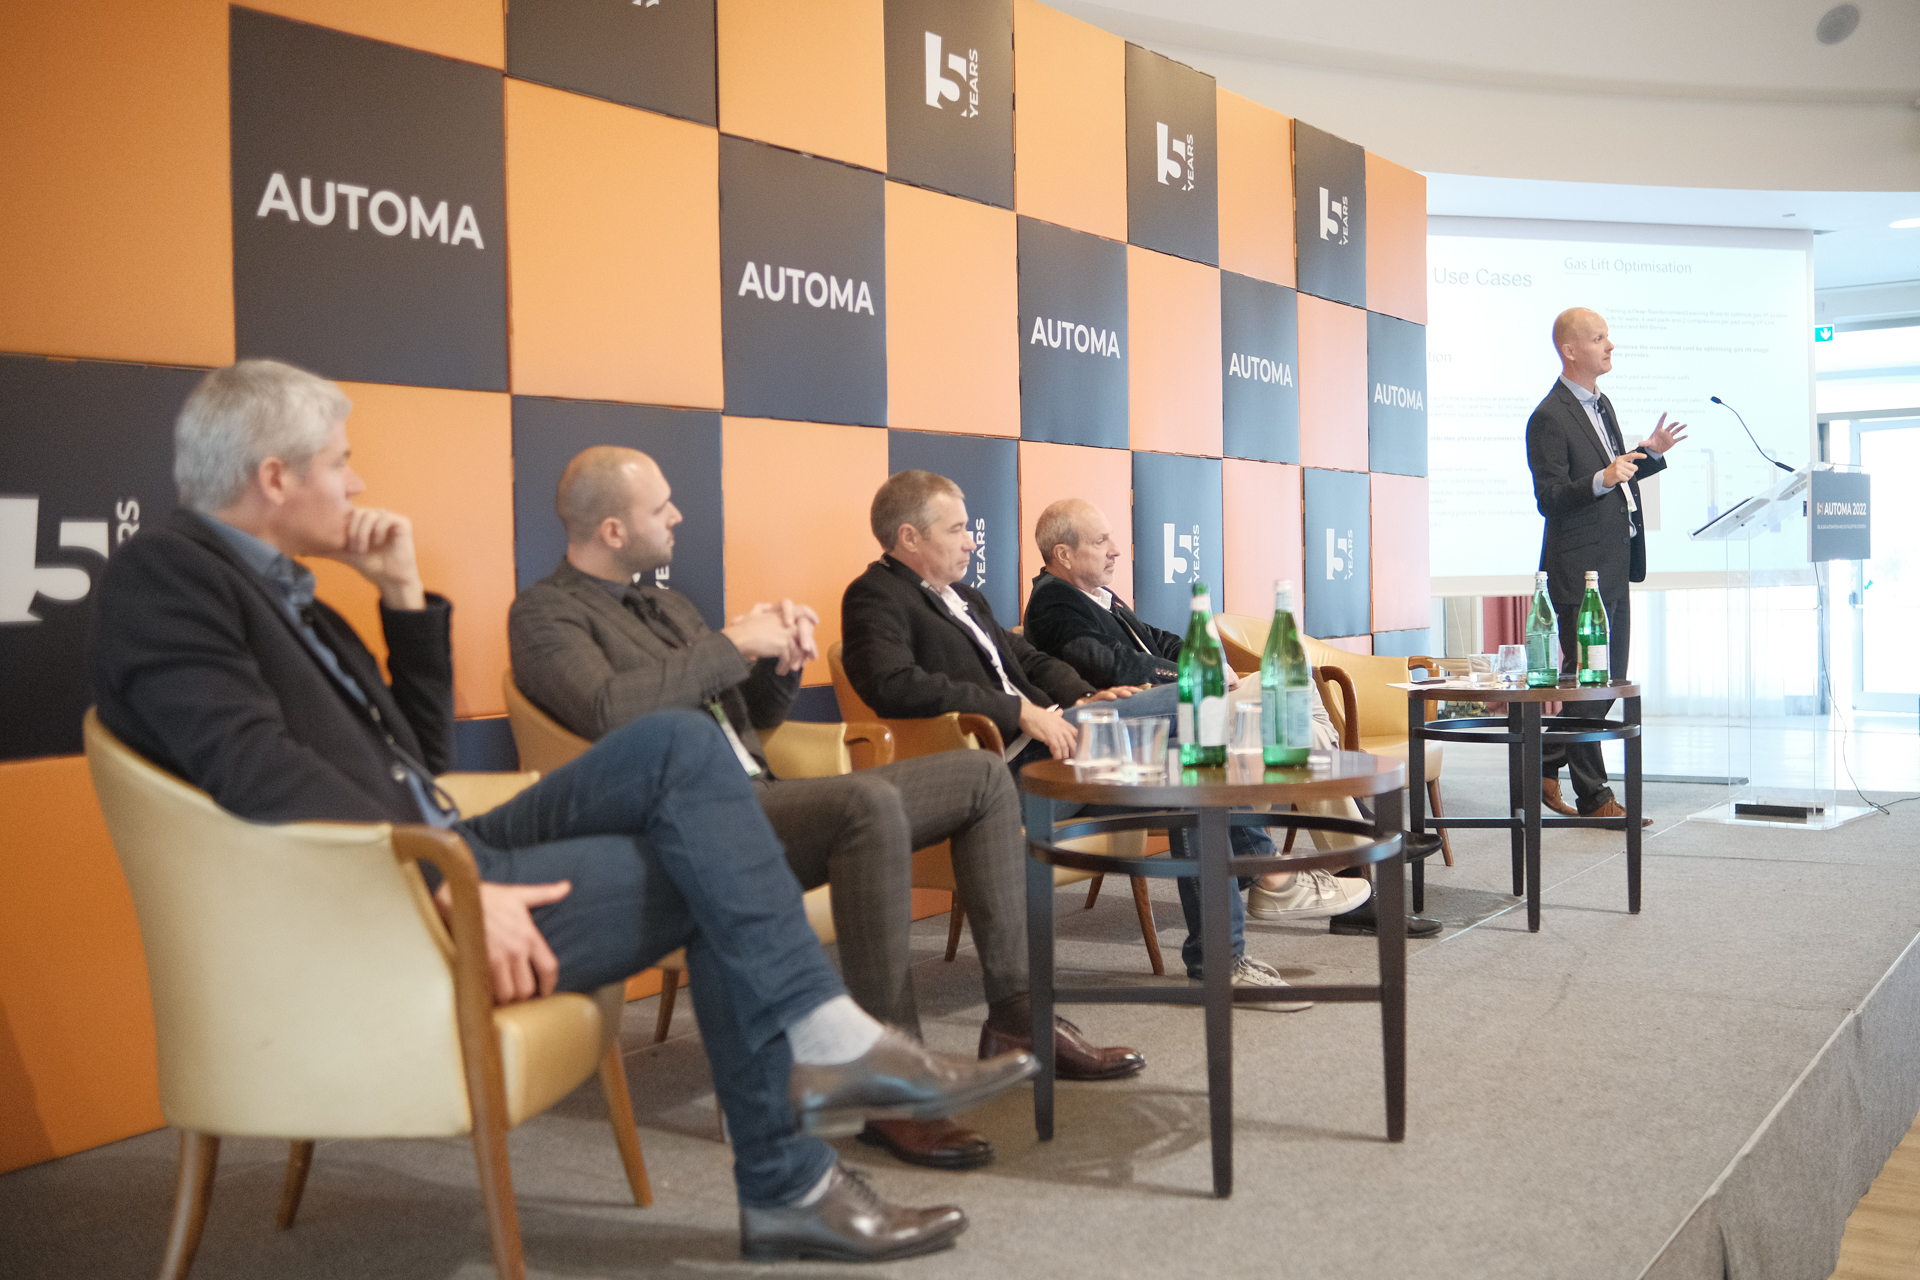 Oil And Gas Automation And Digital Trends To Be Covered At AUTOMA 2023